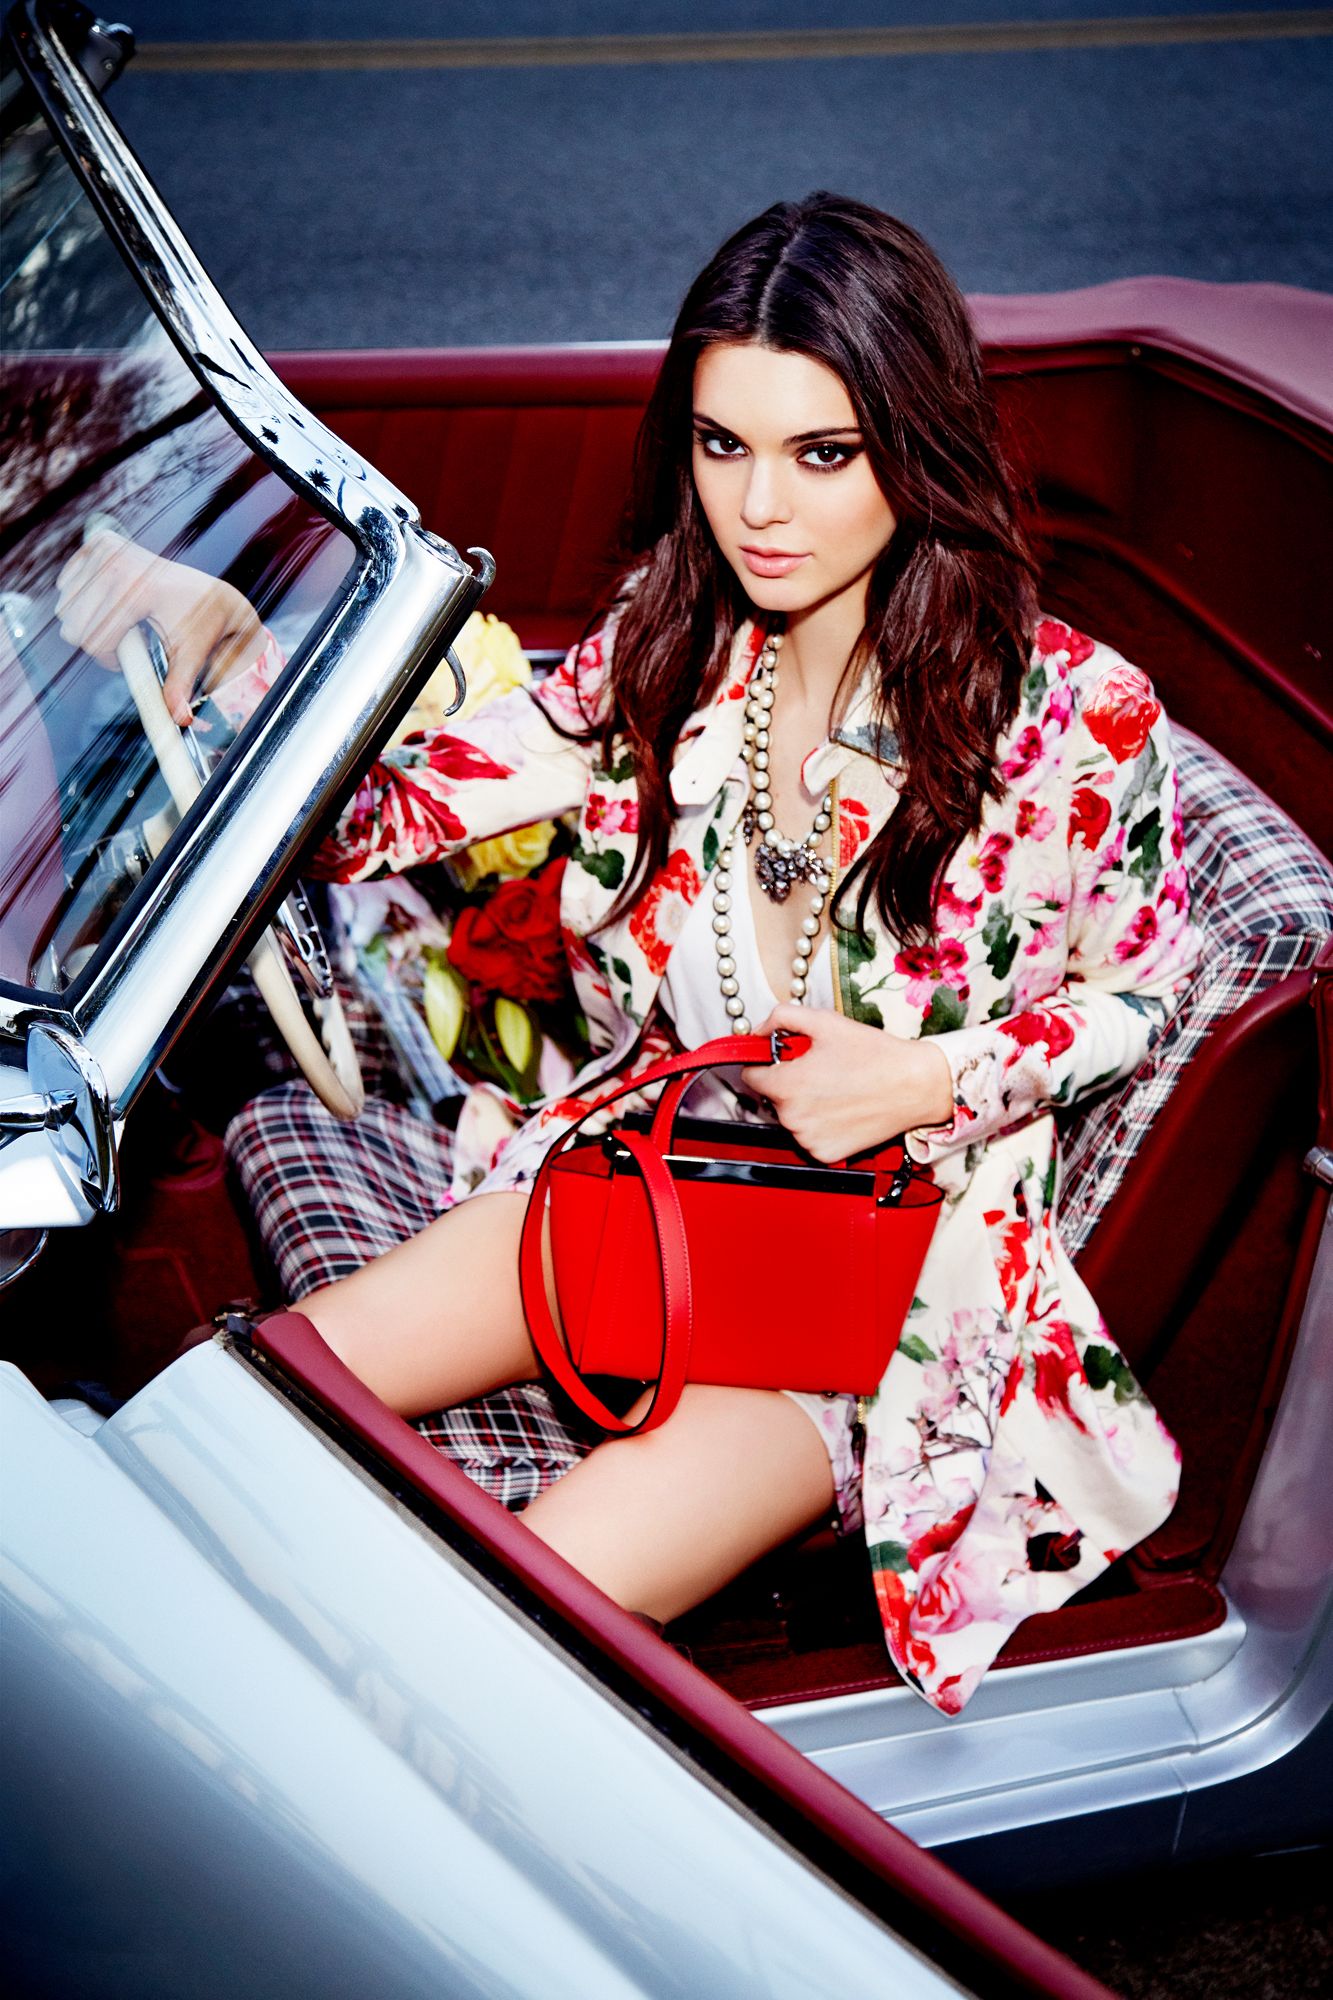 Kendall Jenner Women Model Brunette Vehicle Vehicle Interiors Hand Bags Sitting Convertible High Ang 1333x2000